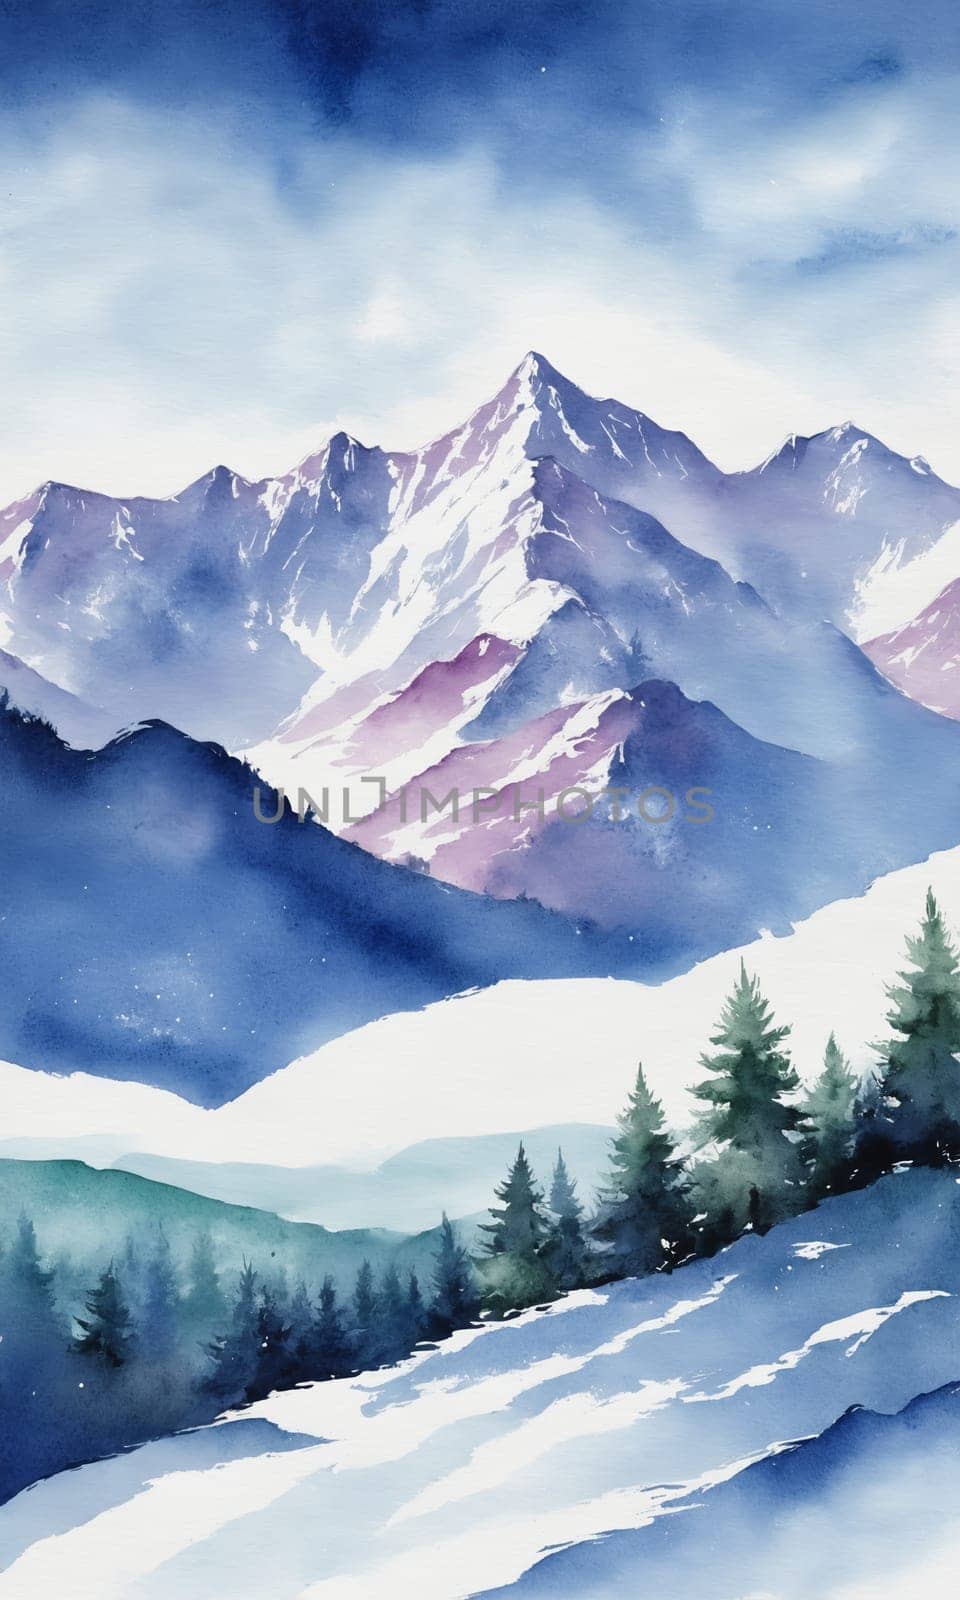 Watercolor winter landscape with mountains, pine trees and blue sky